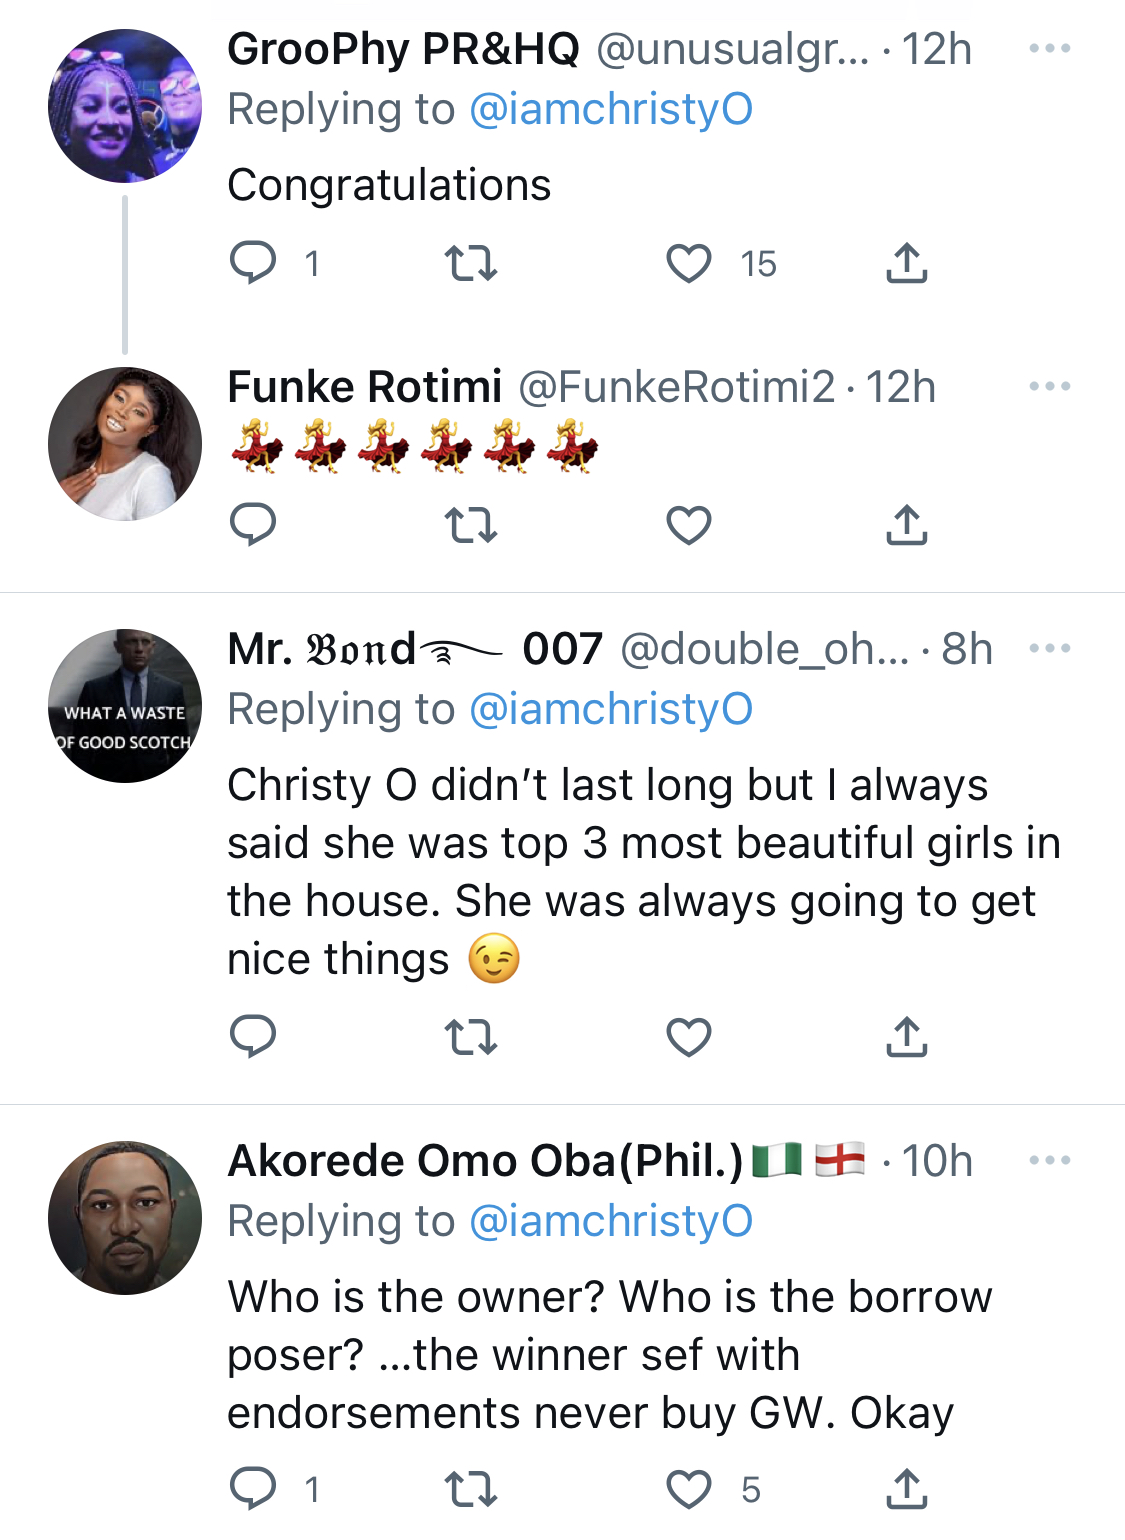 Fans shocked to the bone as BBNaija Housemate Christy O buys a G-wagon barely 1 month after end of show [video]